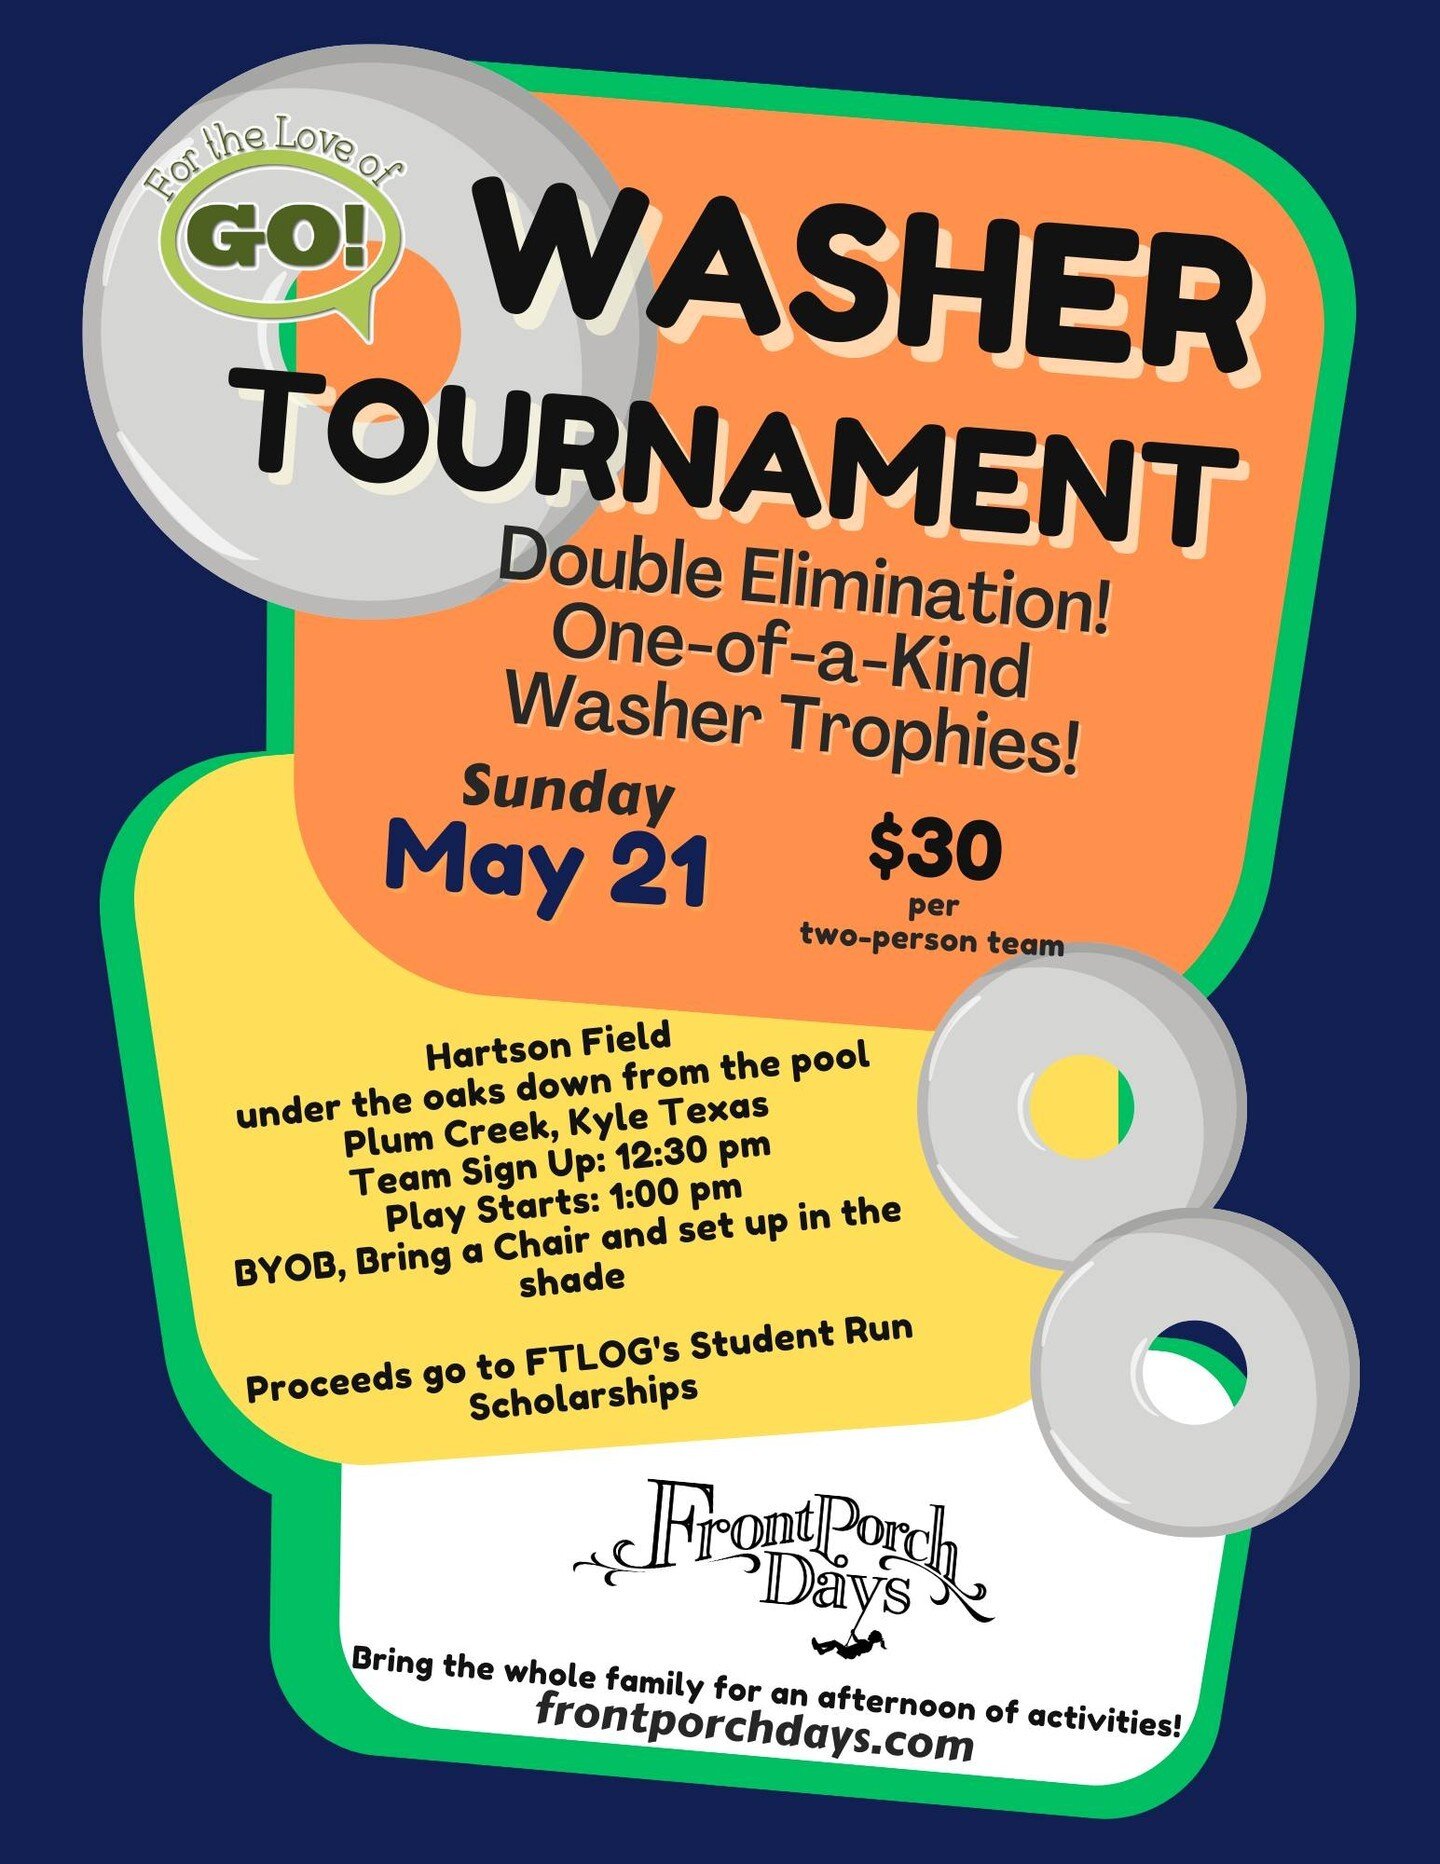 Come see us at the Washer Tournament tomorrow!